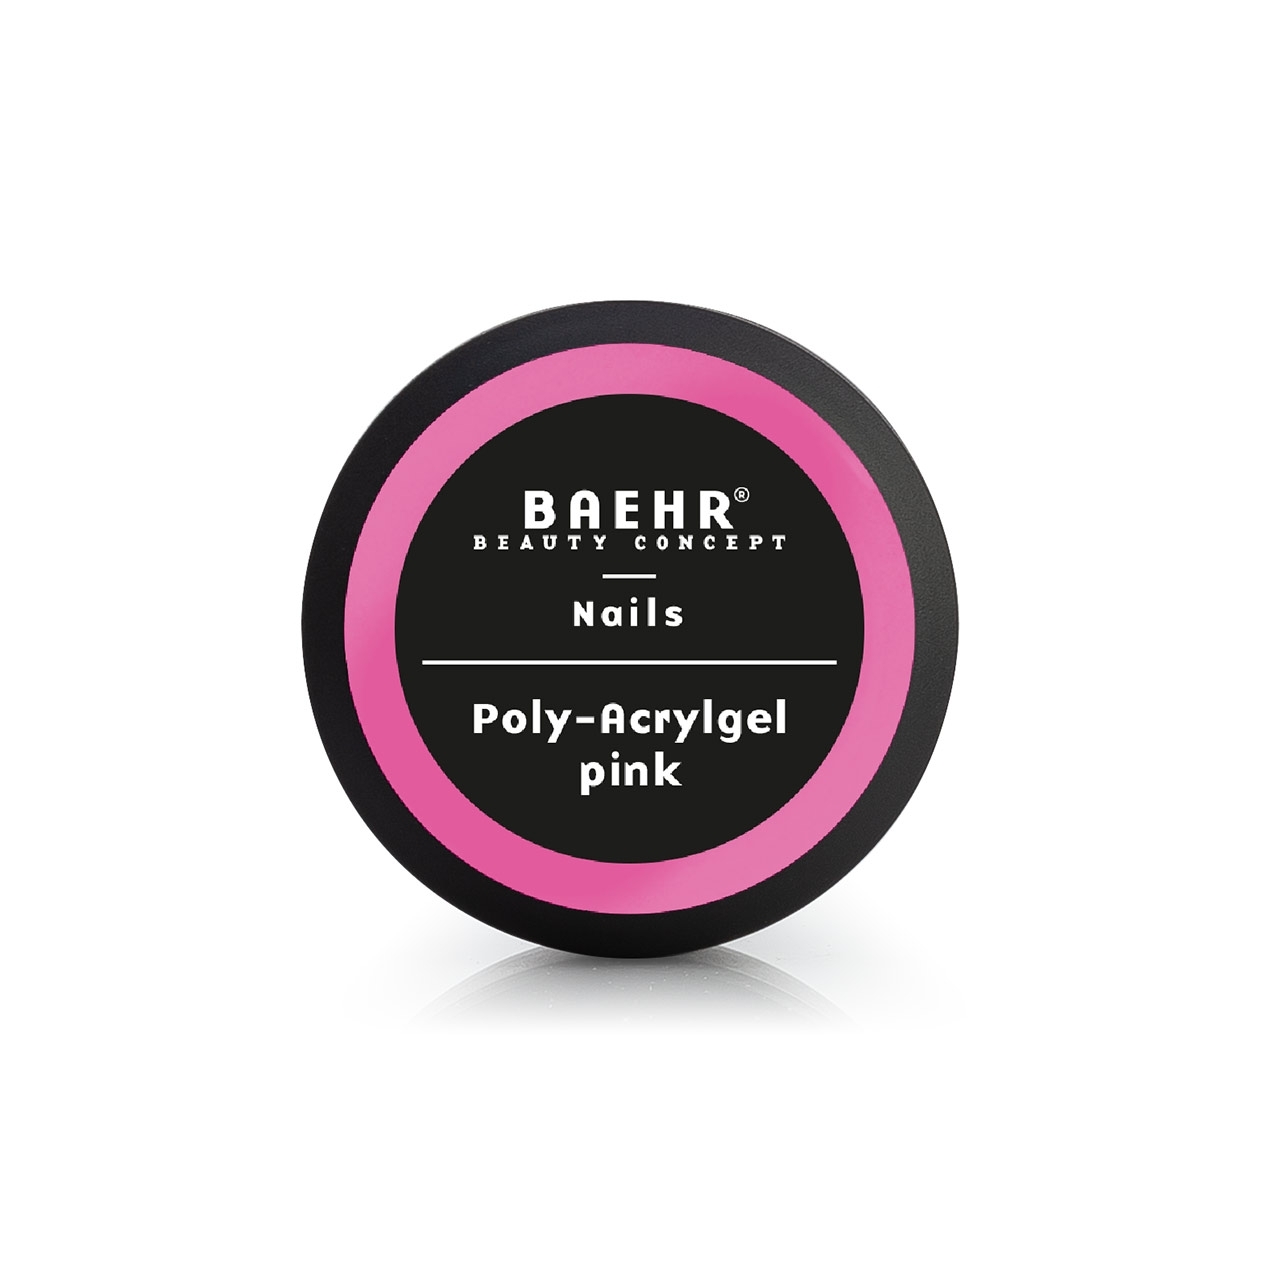 BAEHR BEAUTY CONCEPT - NAILS Poly-Acrylgel pink 30 ml